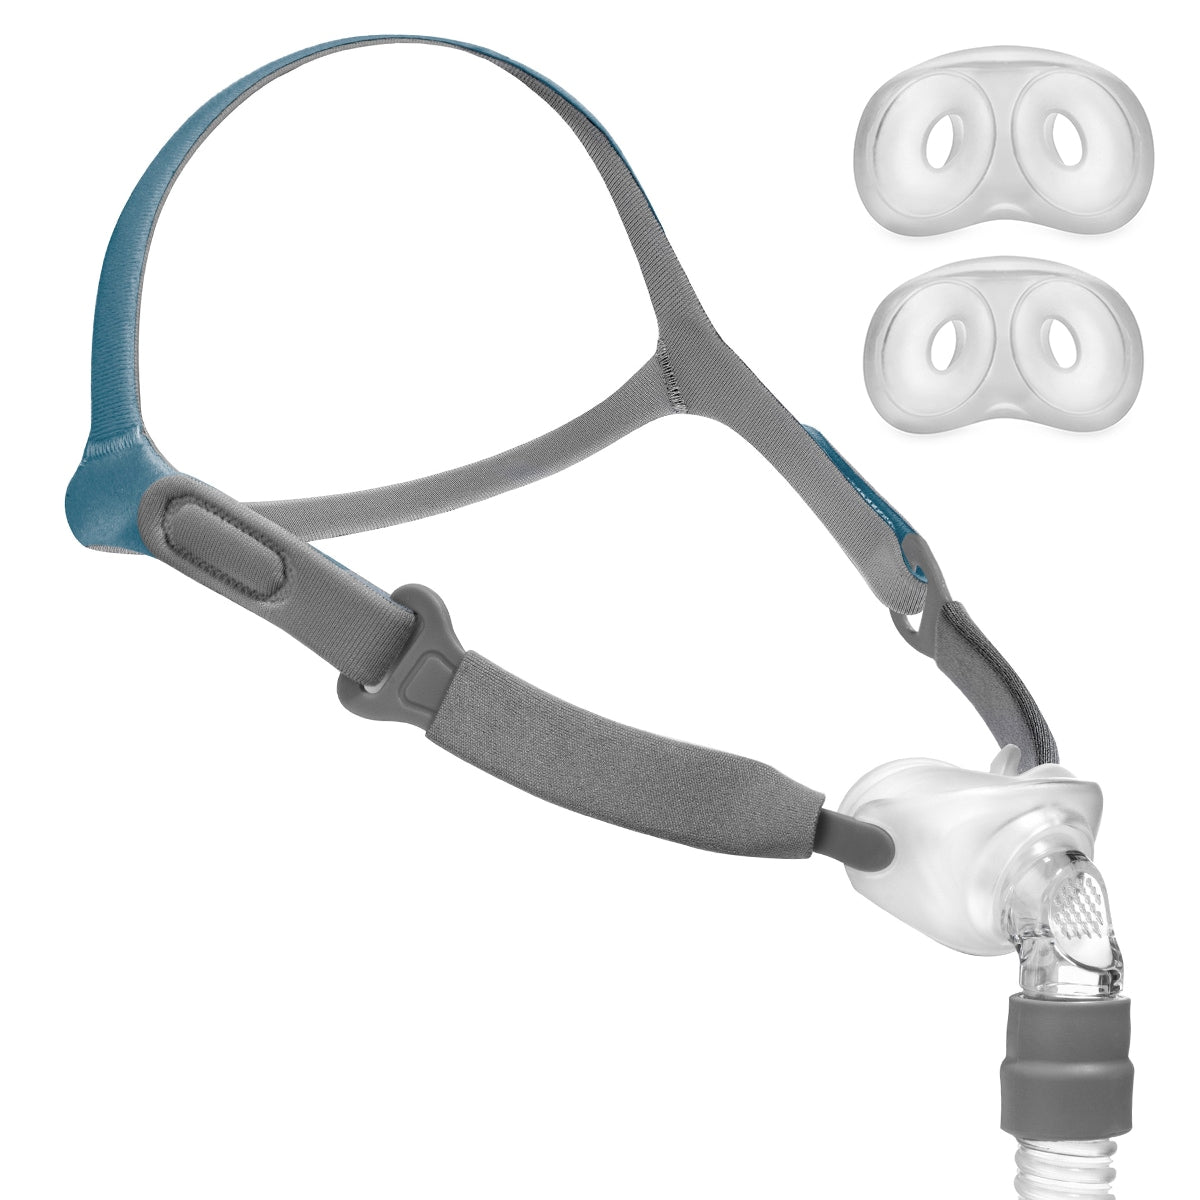 Rio II Nasal Pillow CPAP/BiPAP Mask FitPack with Headgear